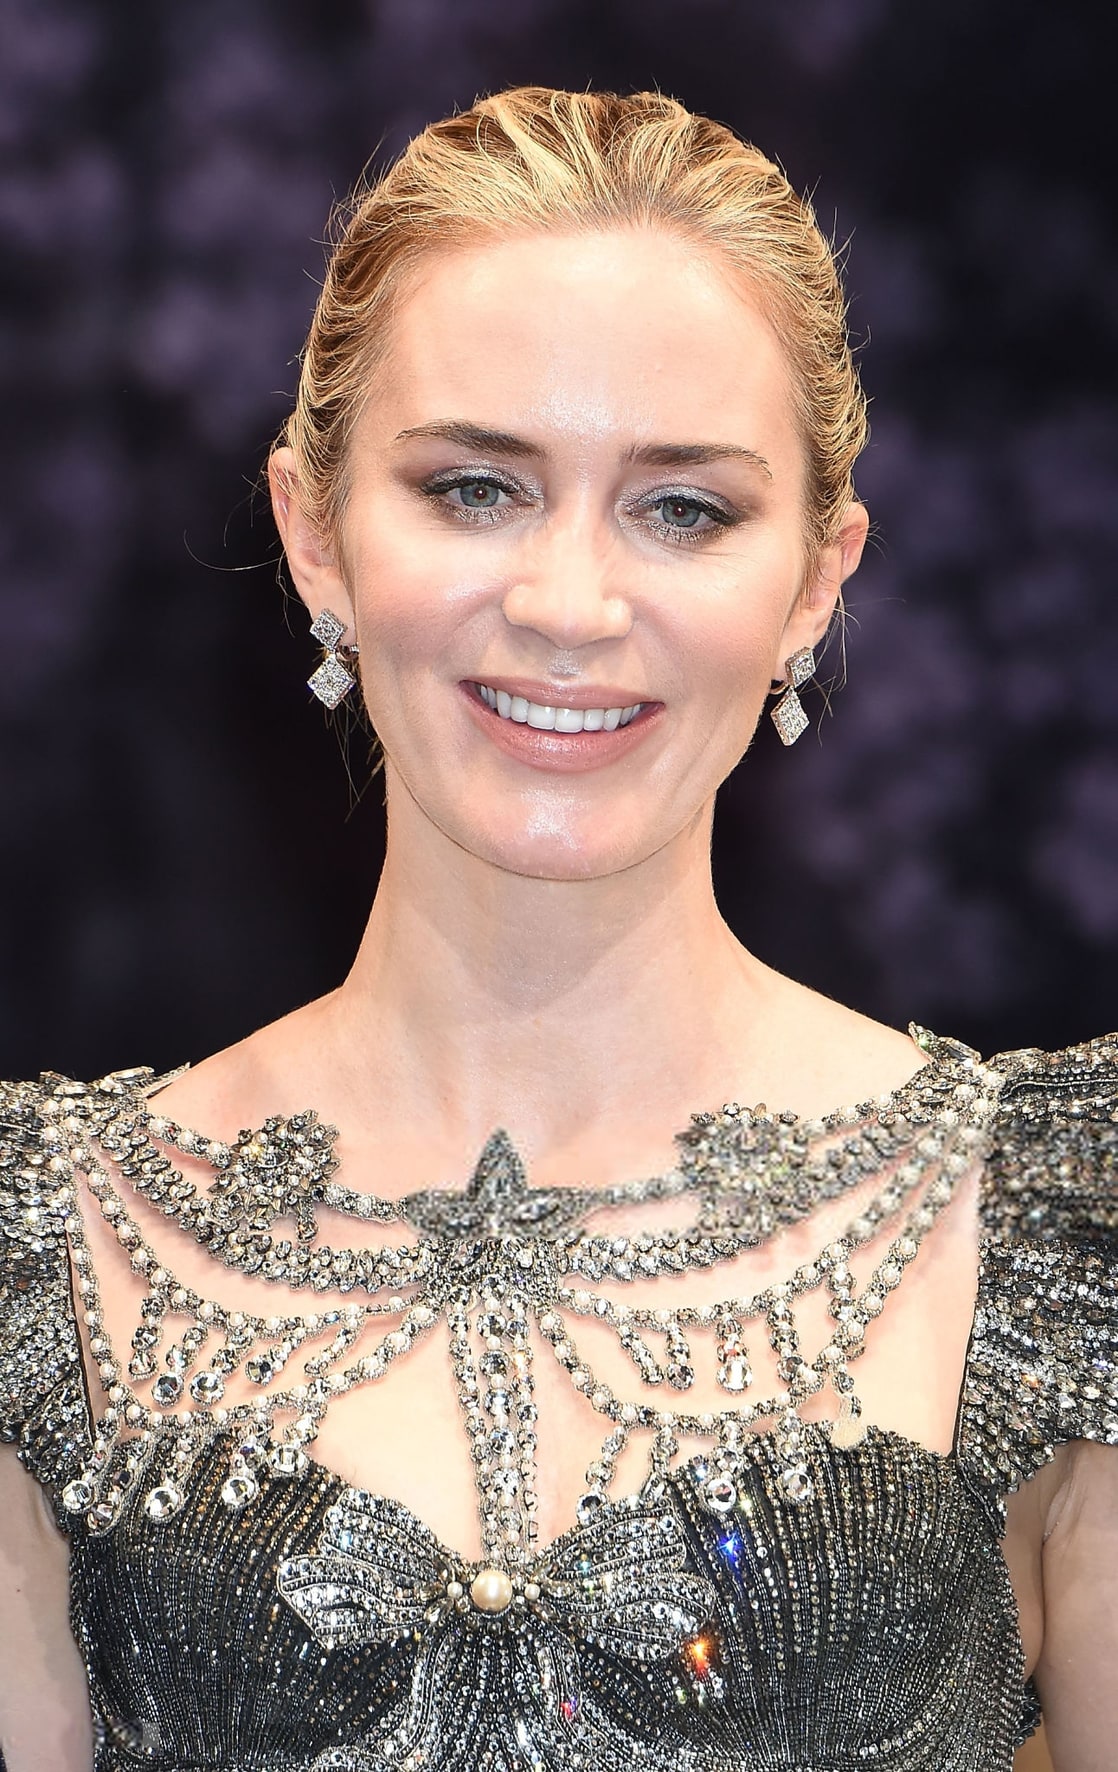 Interesting Facts About Emily Blunt